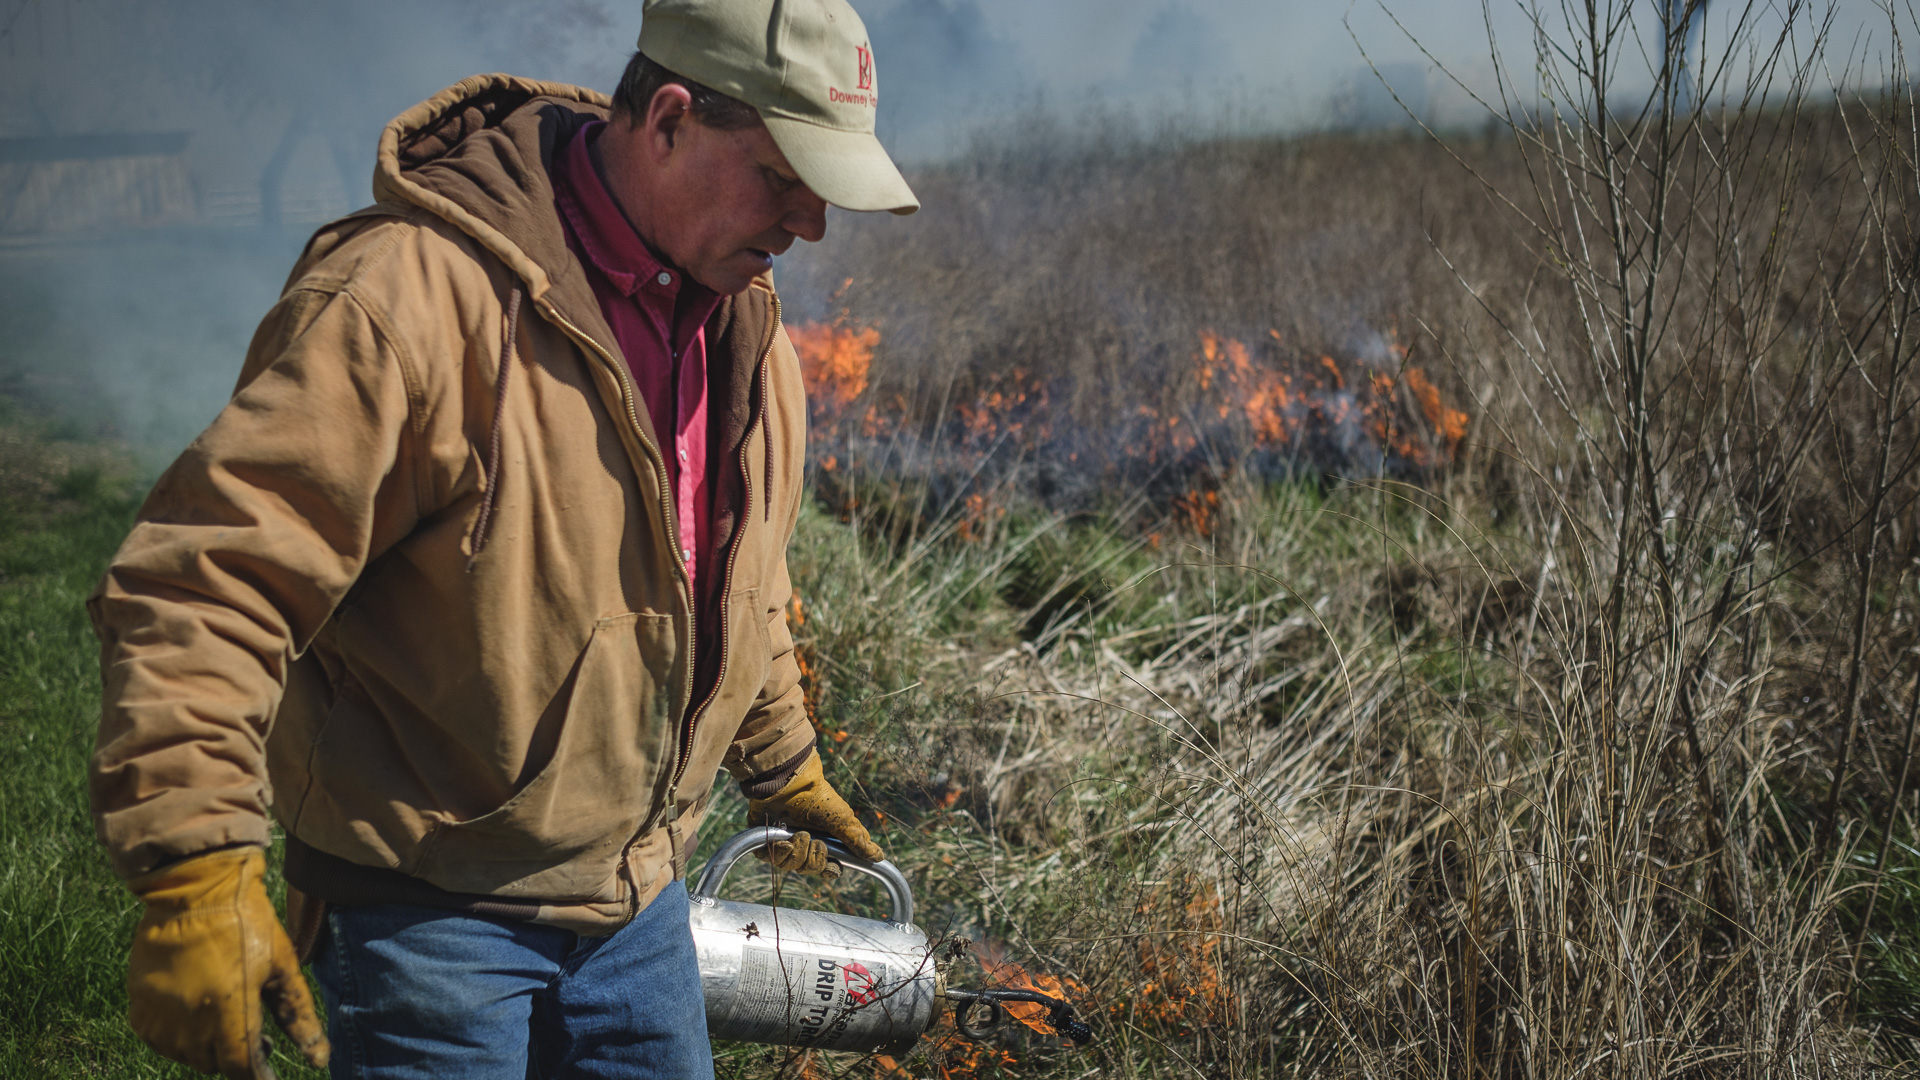 5 Things About Pasture Burning